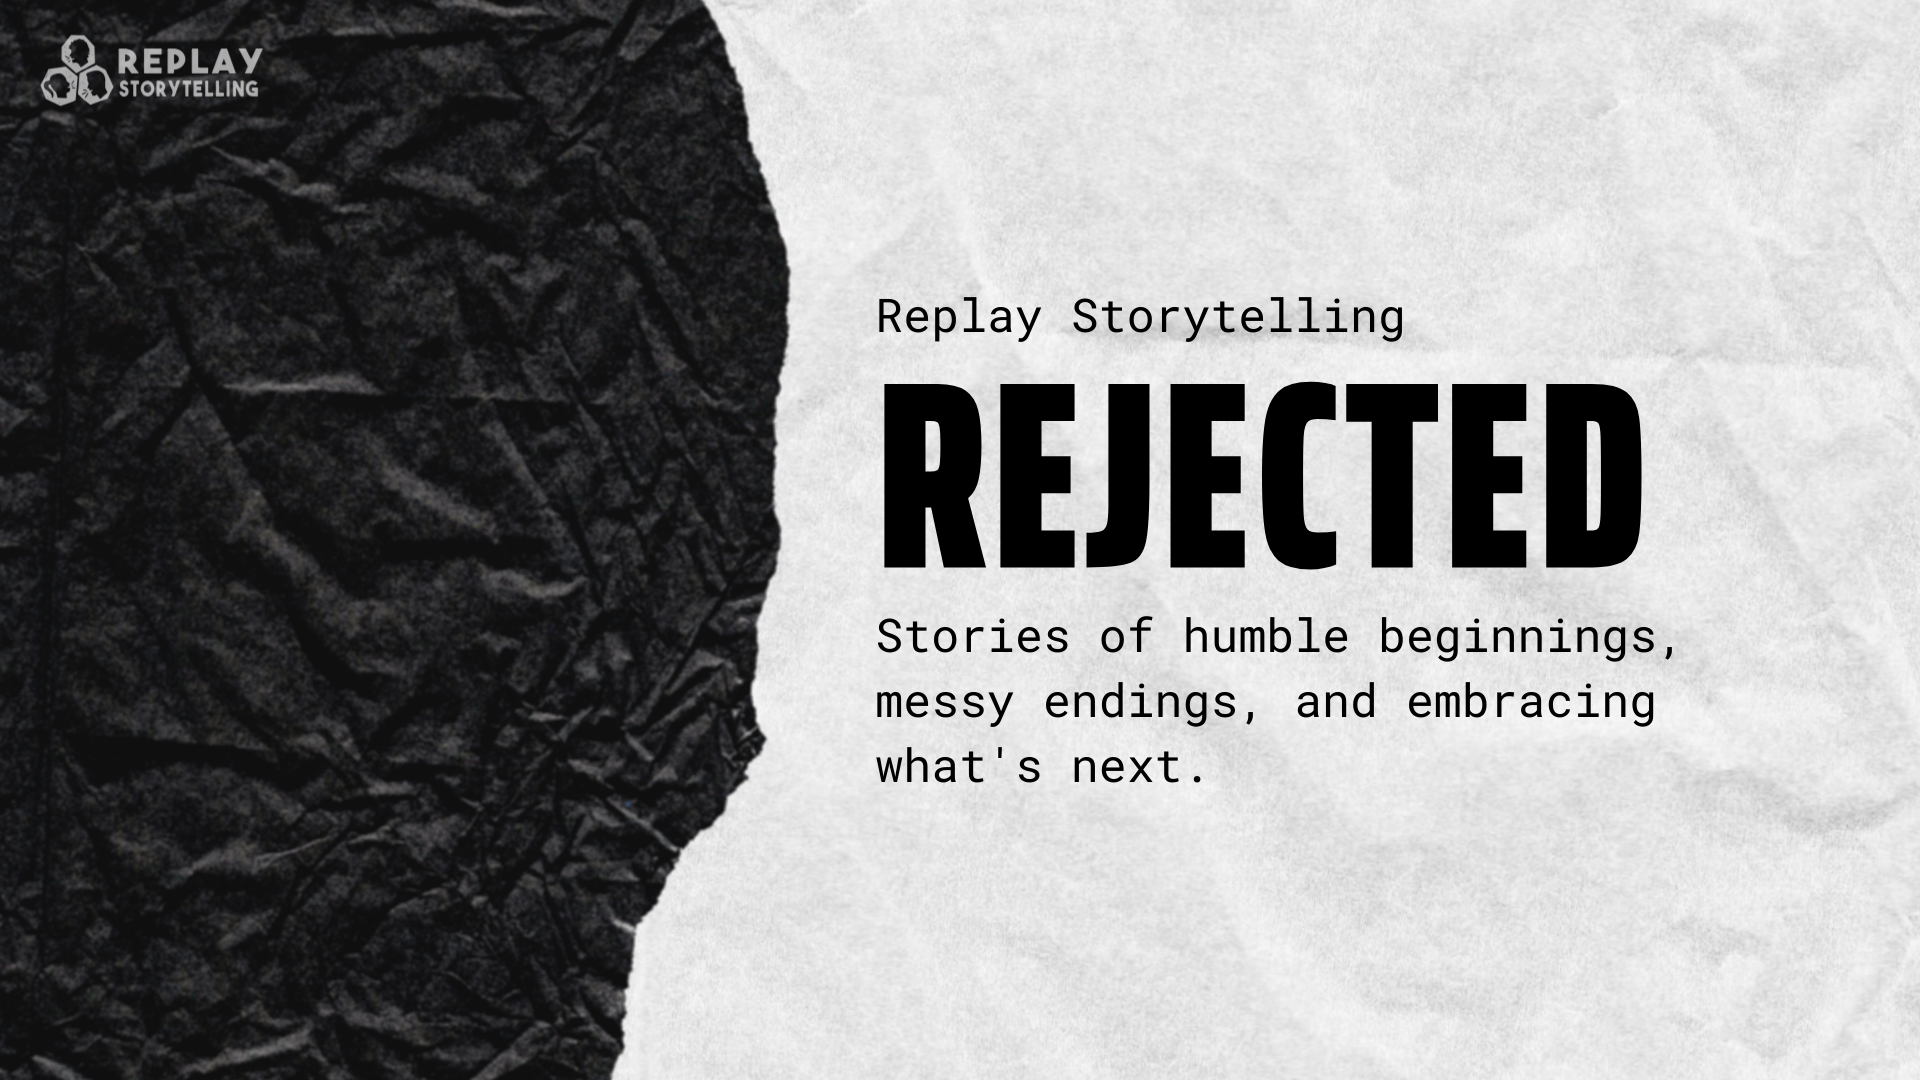 Replay Storytelling presents Rejected